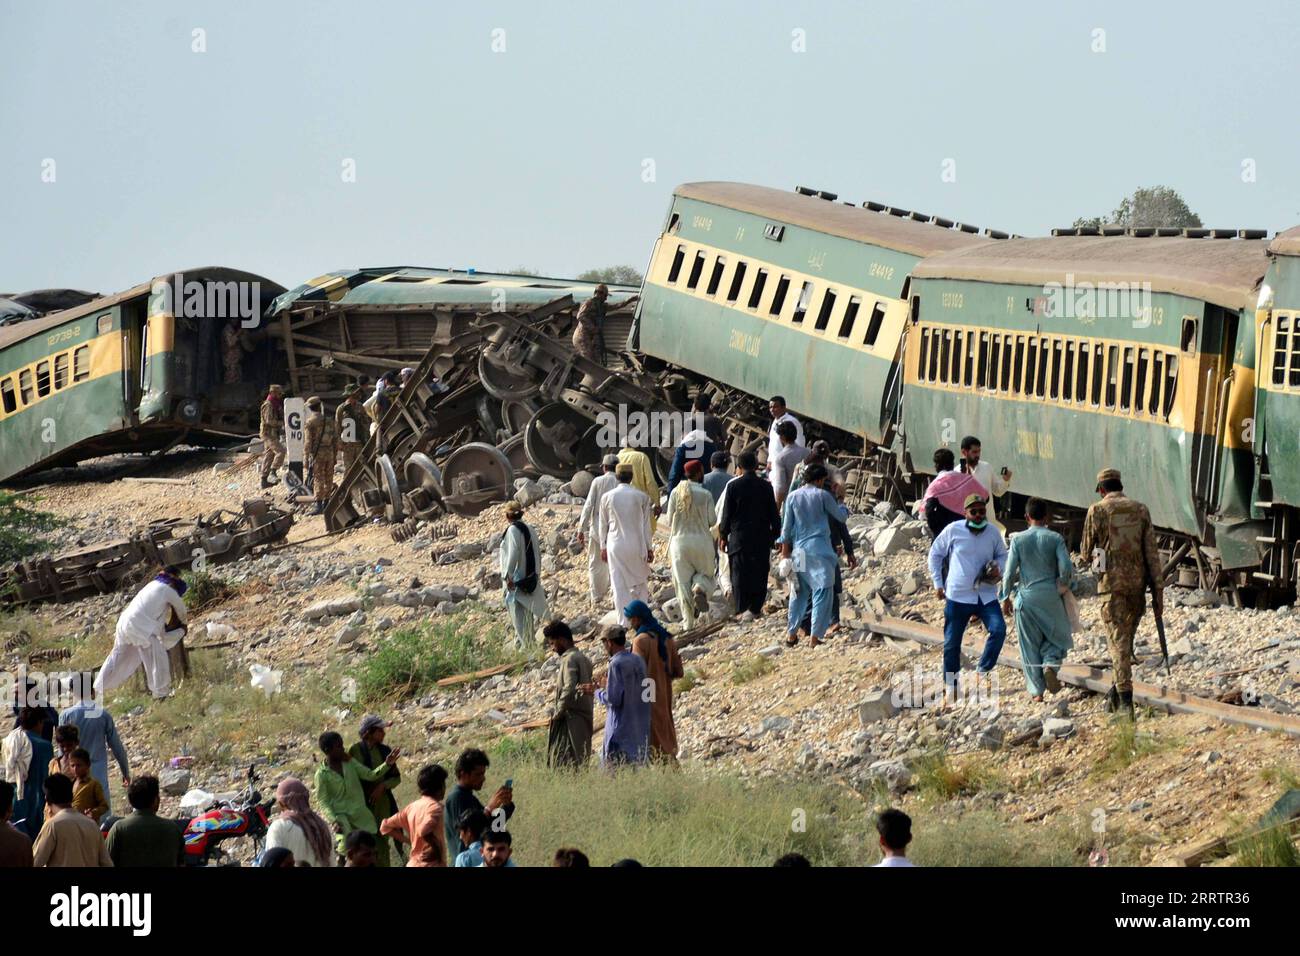 News Bilder des Tages 230807 -- SANGHAR, Aug. 7, 2023 -- People gather near derailed coaches of a passenger train in Sanghar district of Pakistan s southern Sindh province, on Aug. 6, 2023. At least 22 people were killed and over 50 others injured on Sunday after a passenger train derailed in the Sanghar district of Pakistan s southern Sindh province, local police said. The accident took place when 10 coaches of the Hazara Express train derailed when it was crossing a canal bridge near Sarhari town in the Shahdadpur area of the district, Muhammad Younis Chandio, deputy inspector general of pol Stock Photo